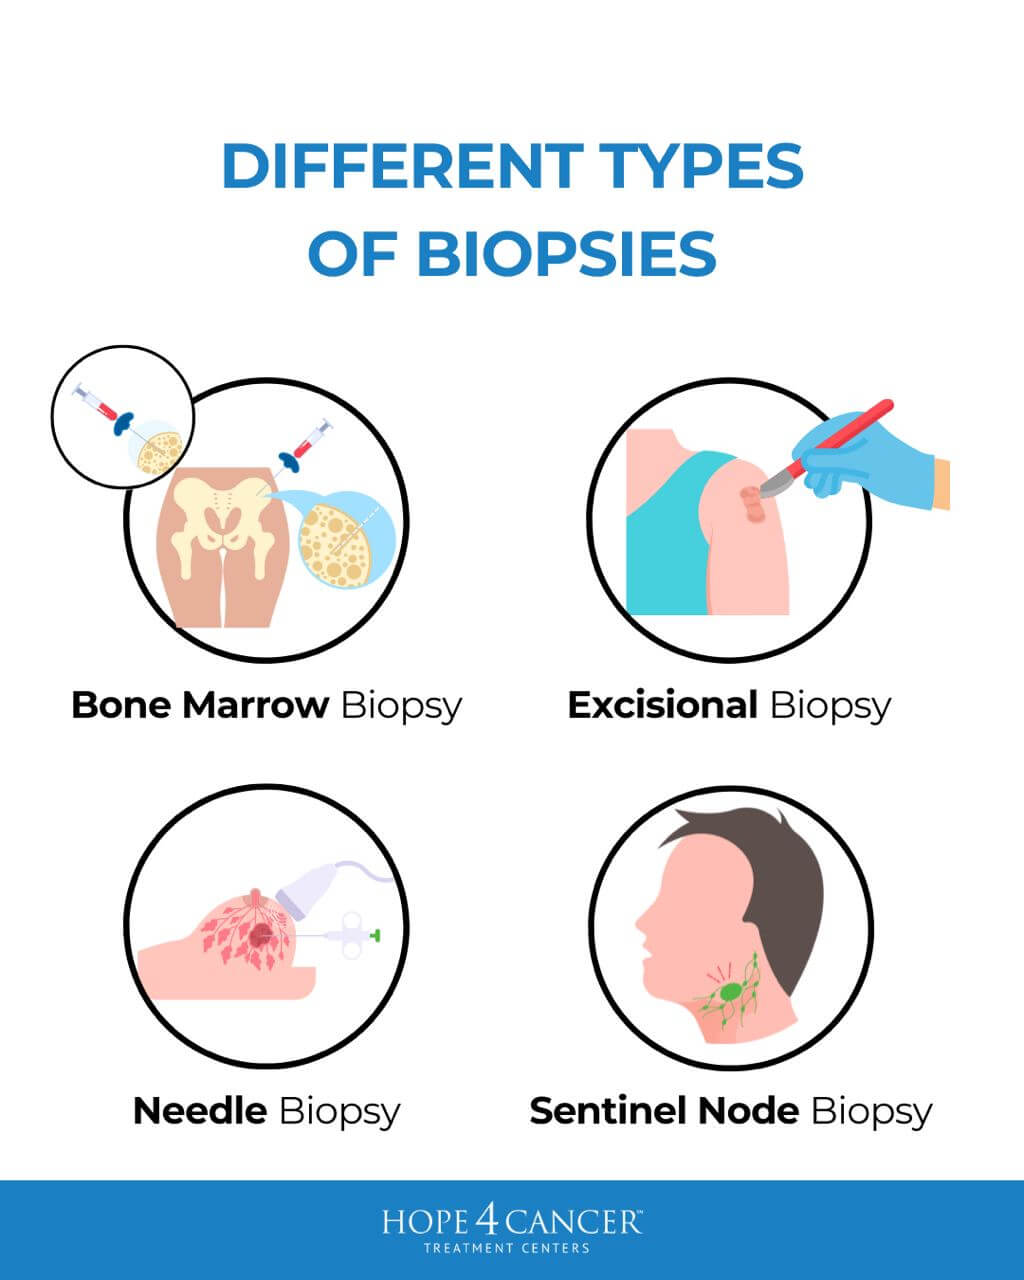 Risks and Benefits of Biopsies